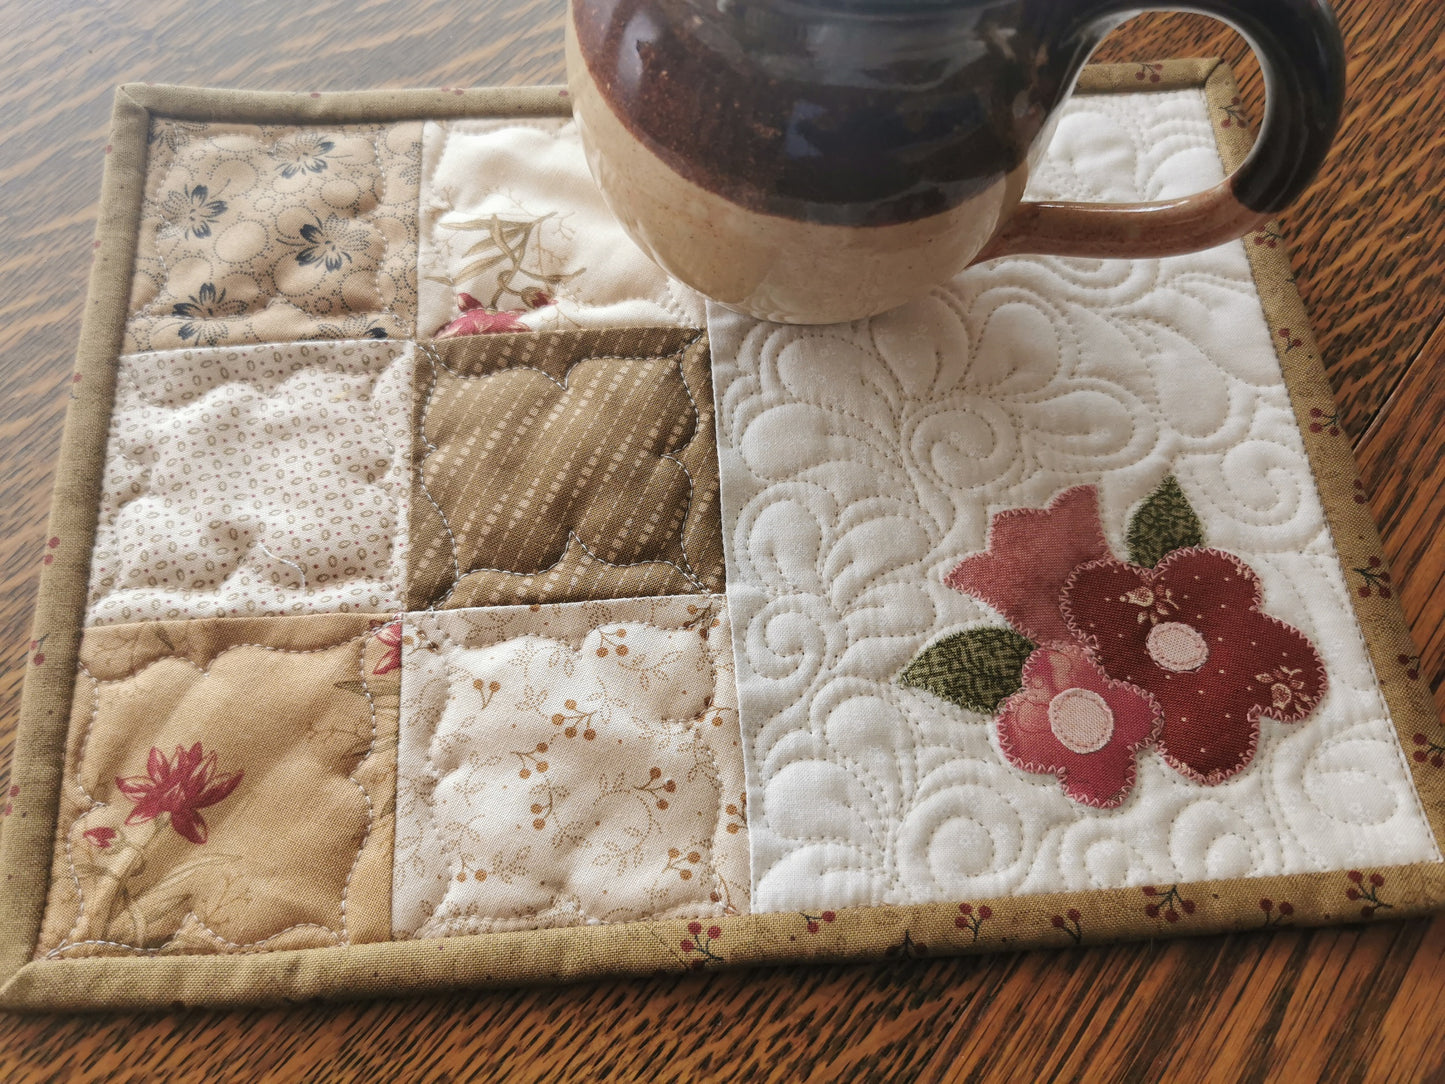 coffee mug sitting on the quilt showing scale